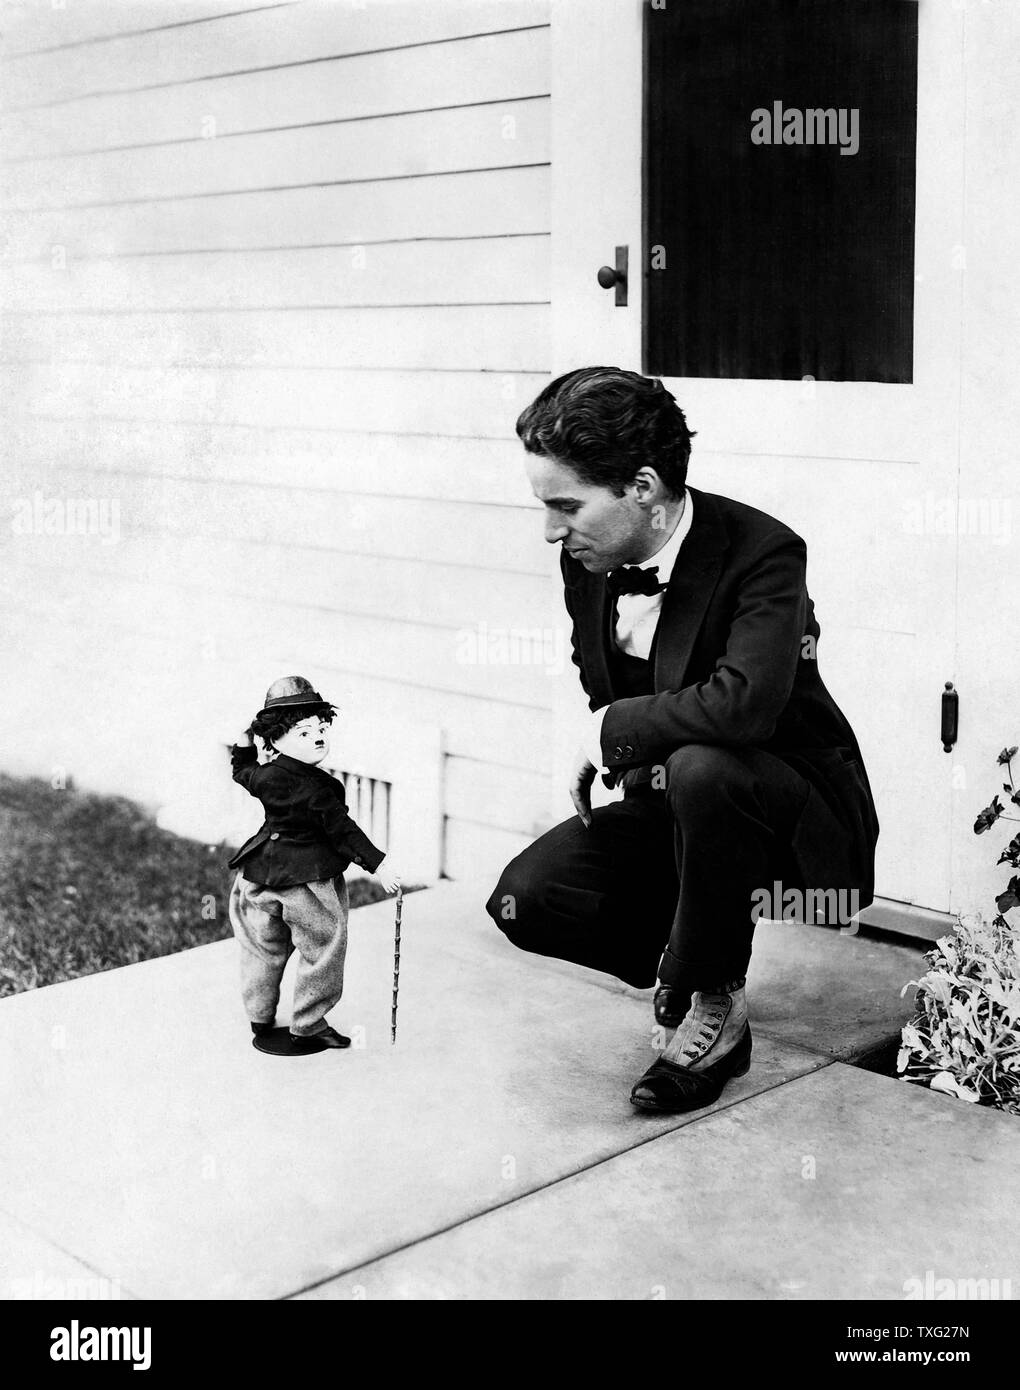 Director, actor, producer Charles Chaplin with a figurine in his image Ca 1915 Stock Photo